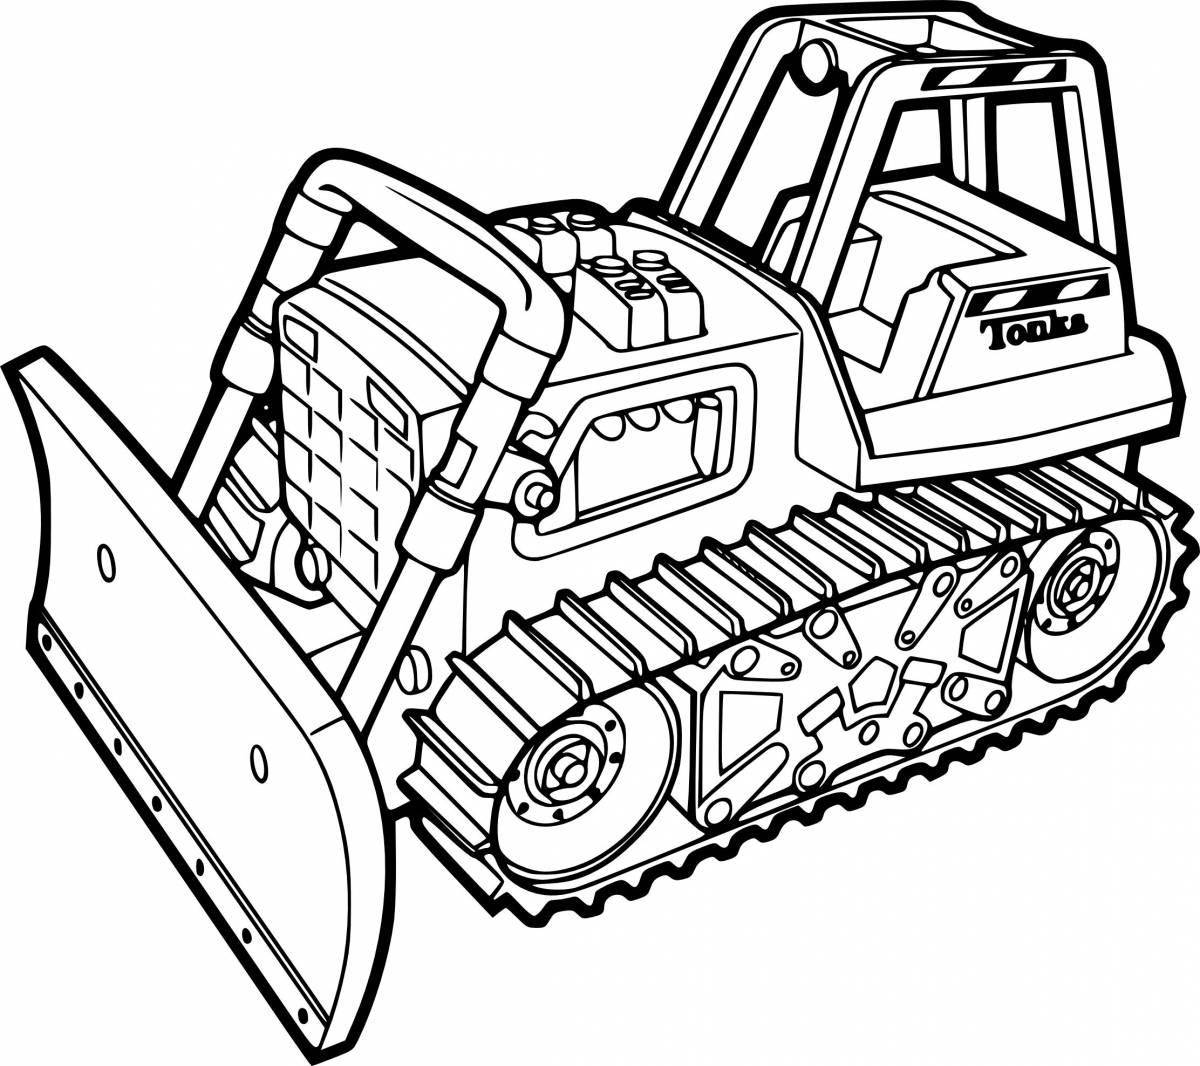 Snowblower coloring book for kids